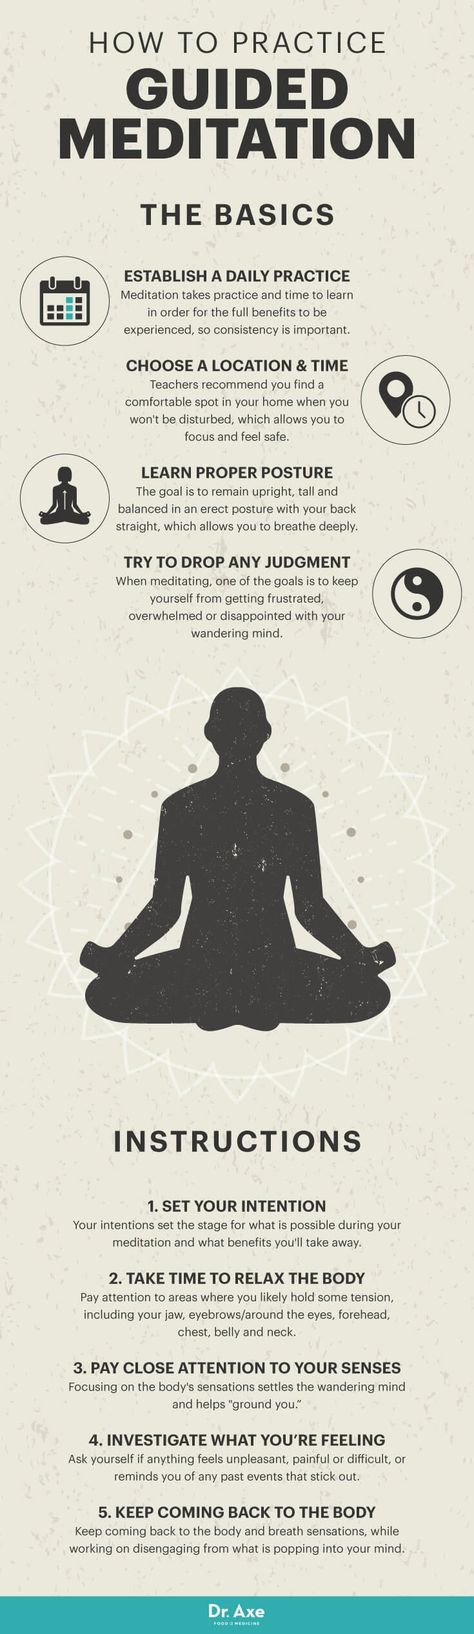 Pros and cons of meditation